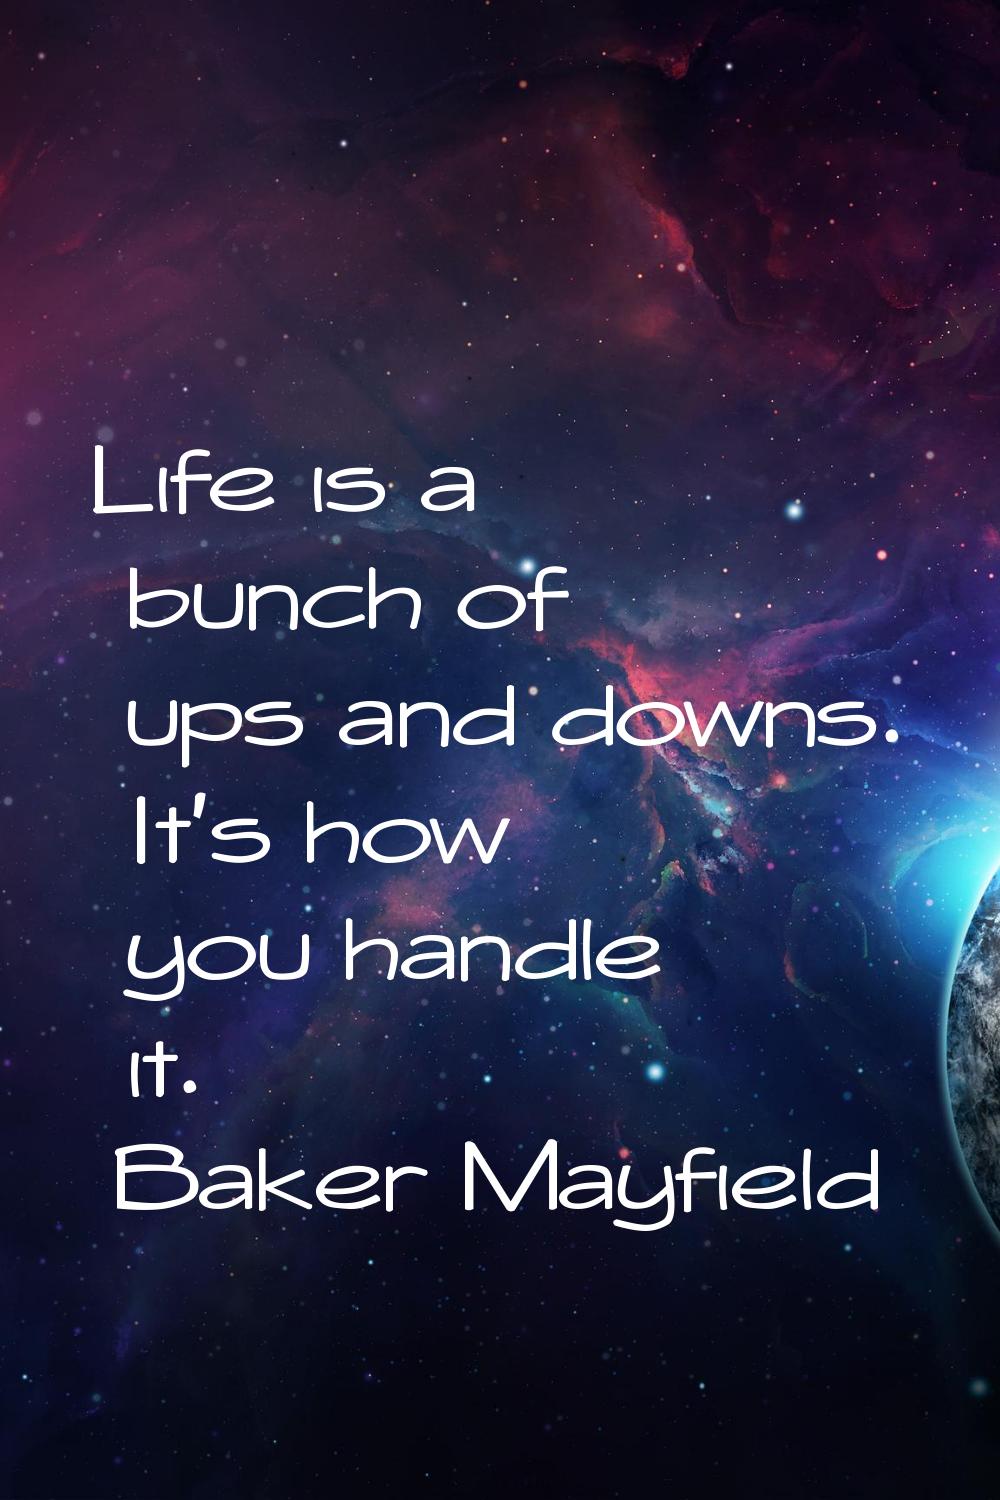 Life is a bunch of ups and downs. It's how you handle it.